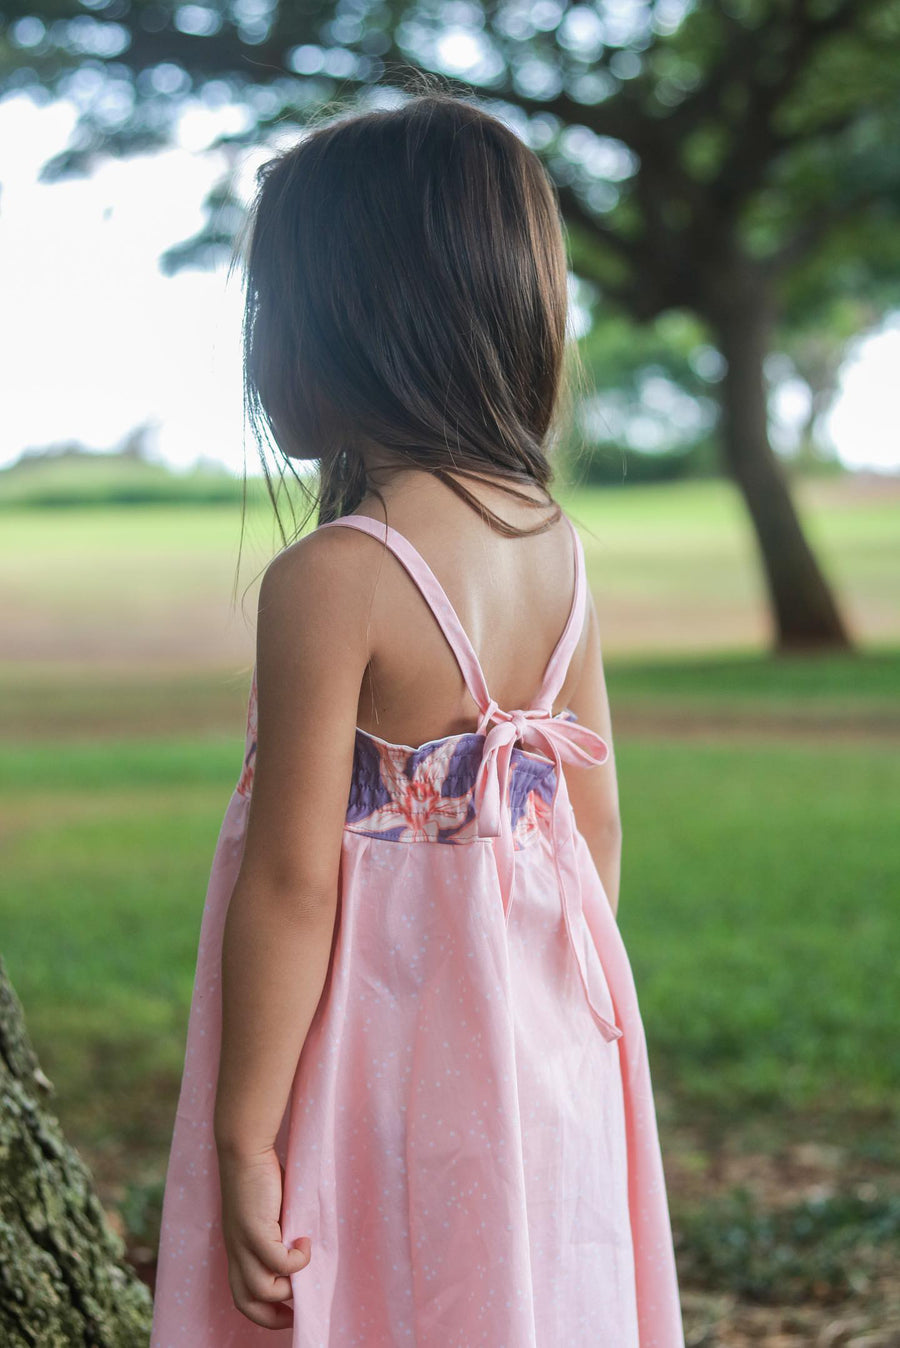 Girls Dress - Orchid Print  - Toddler Dress - Baby Girl Dress - Twirly Dress with Adjustable Straps-  Made in Maui, Hawaii